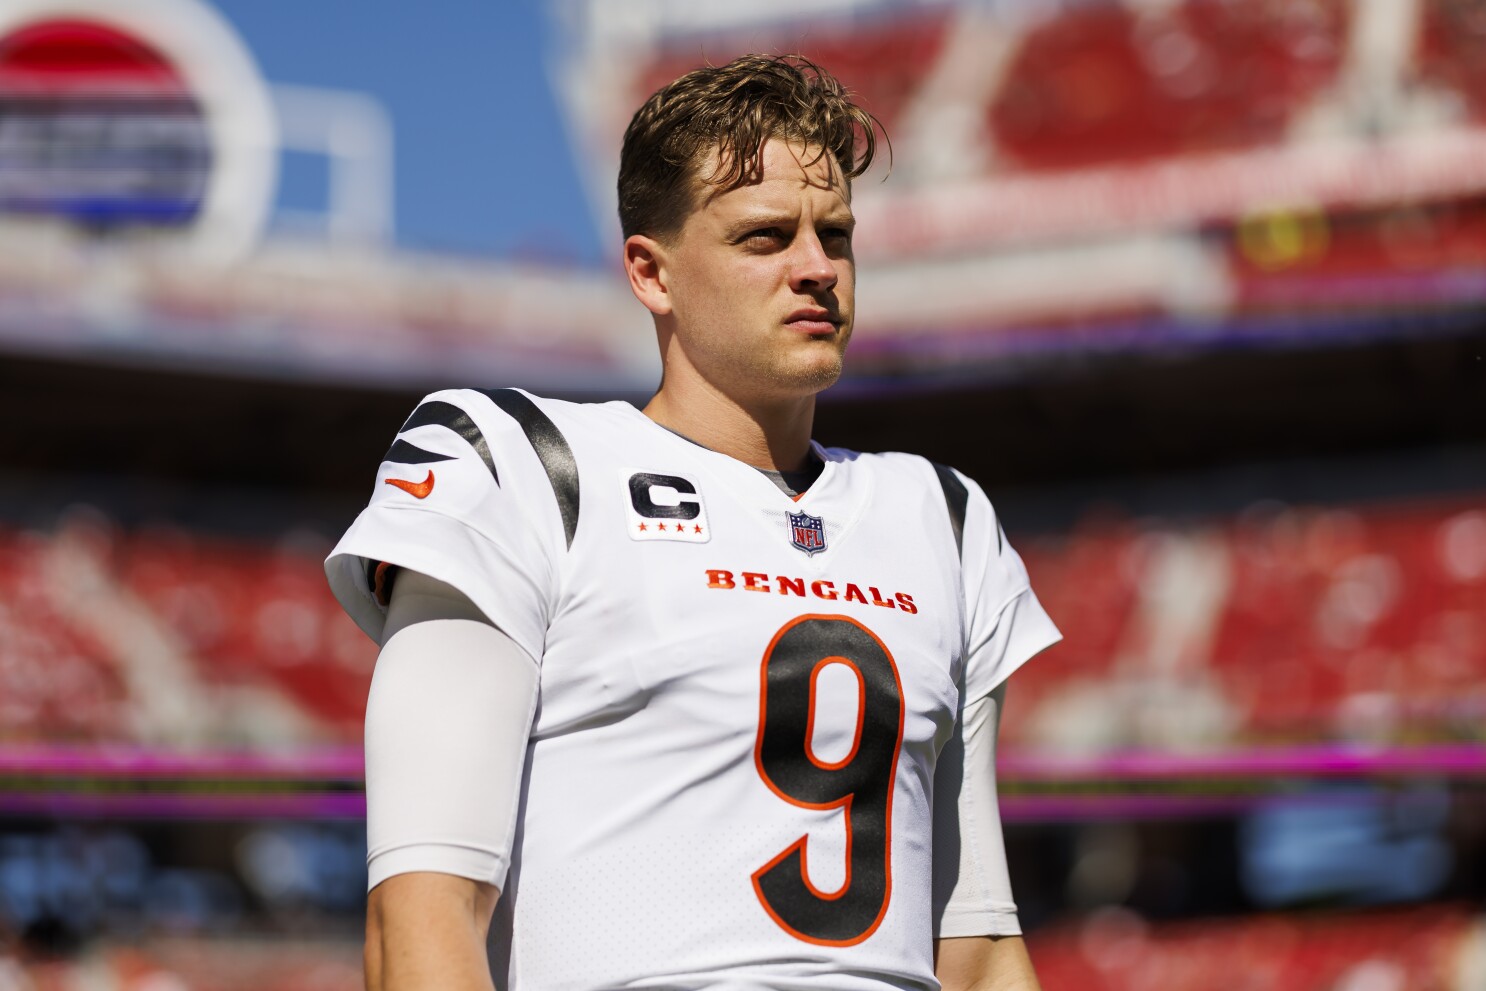 Joe Burrow's Road to Recovery A Glimpse into the Bengals QB's Comeback Journey